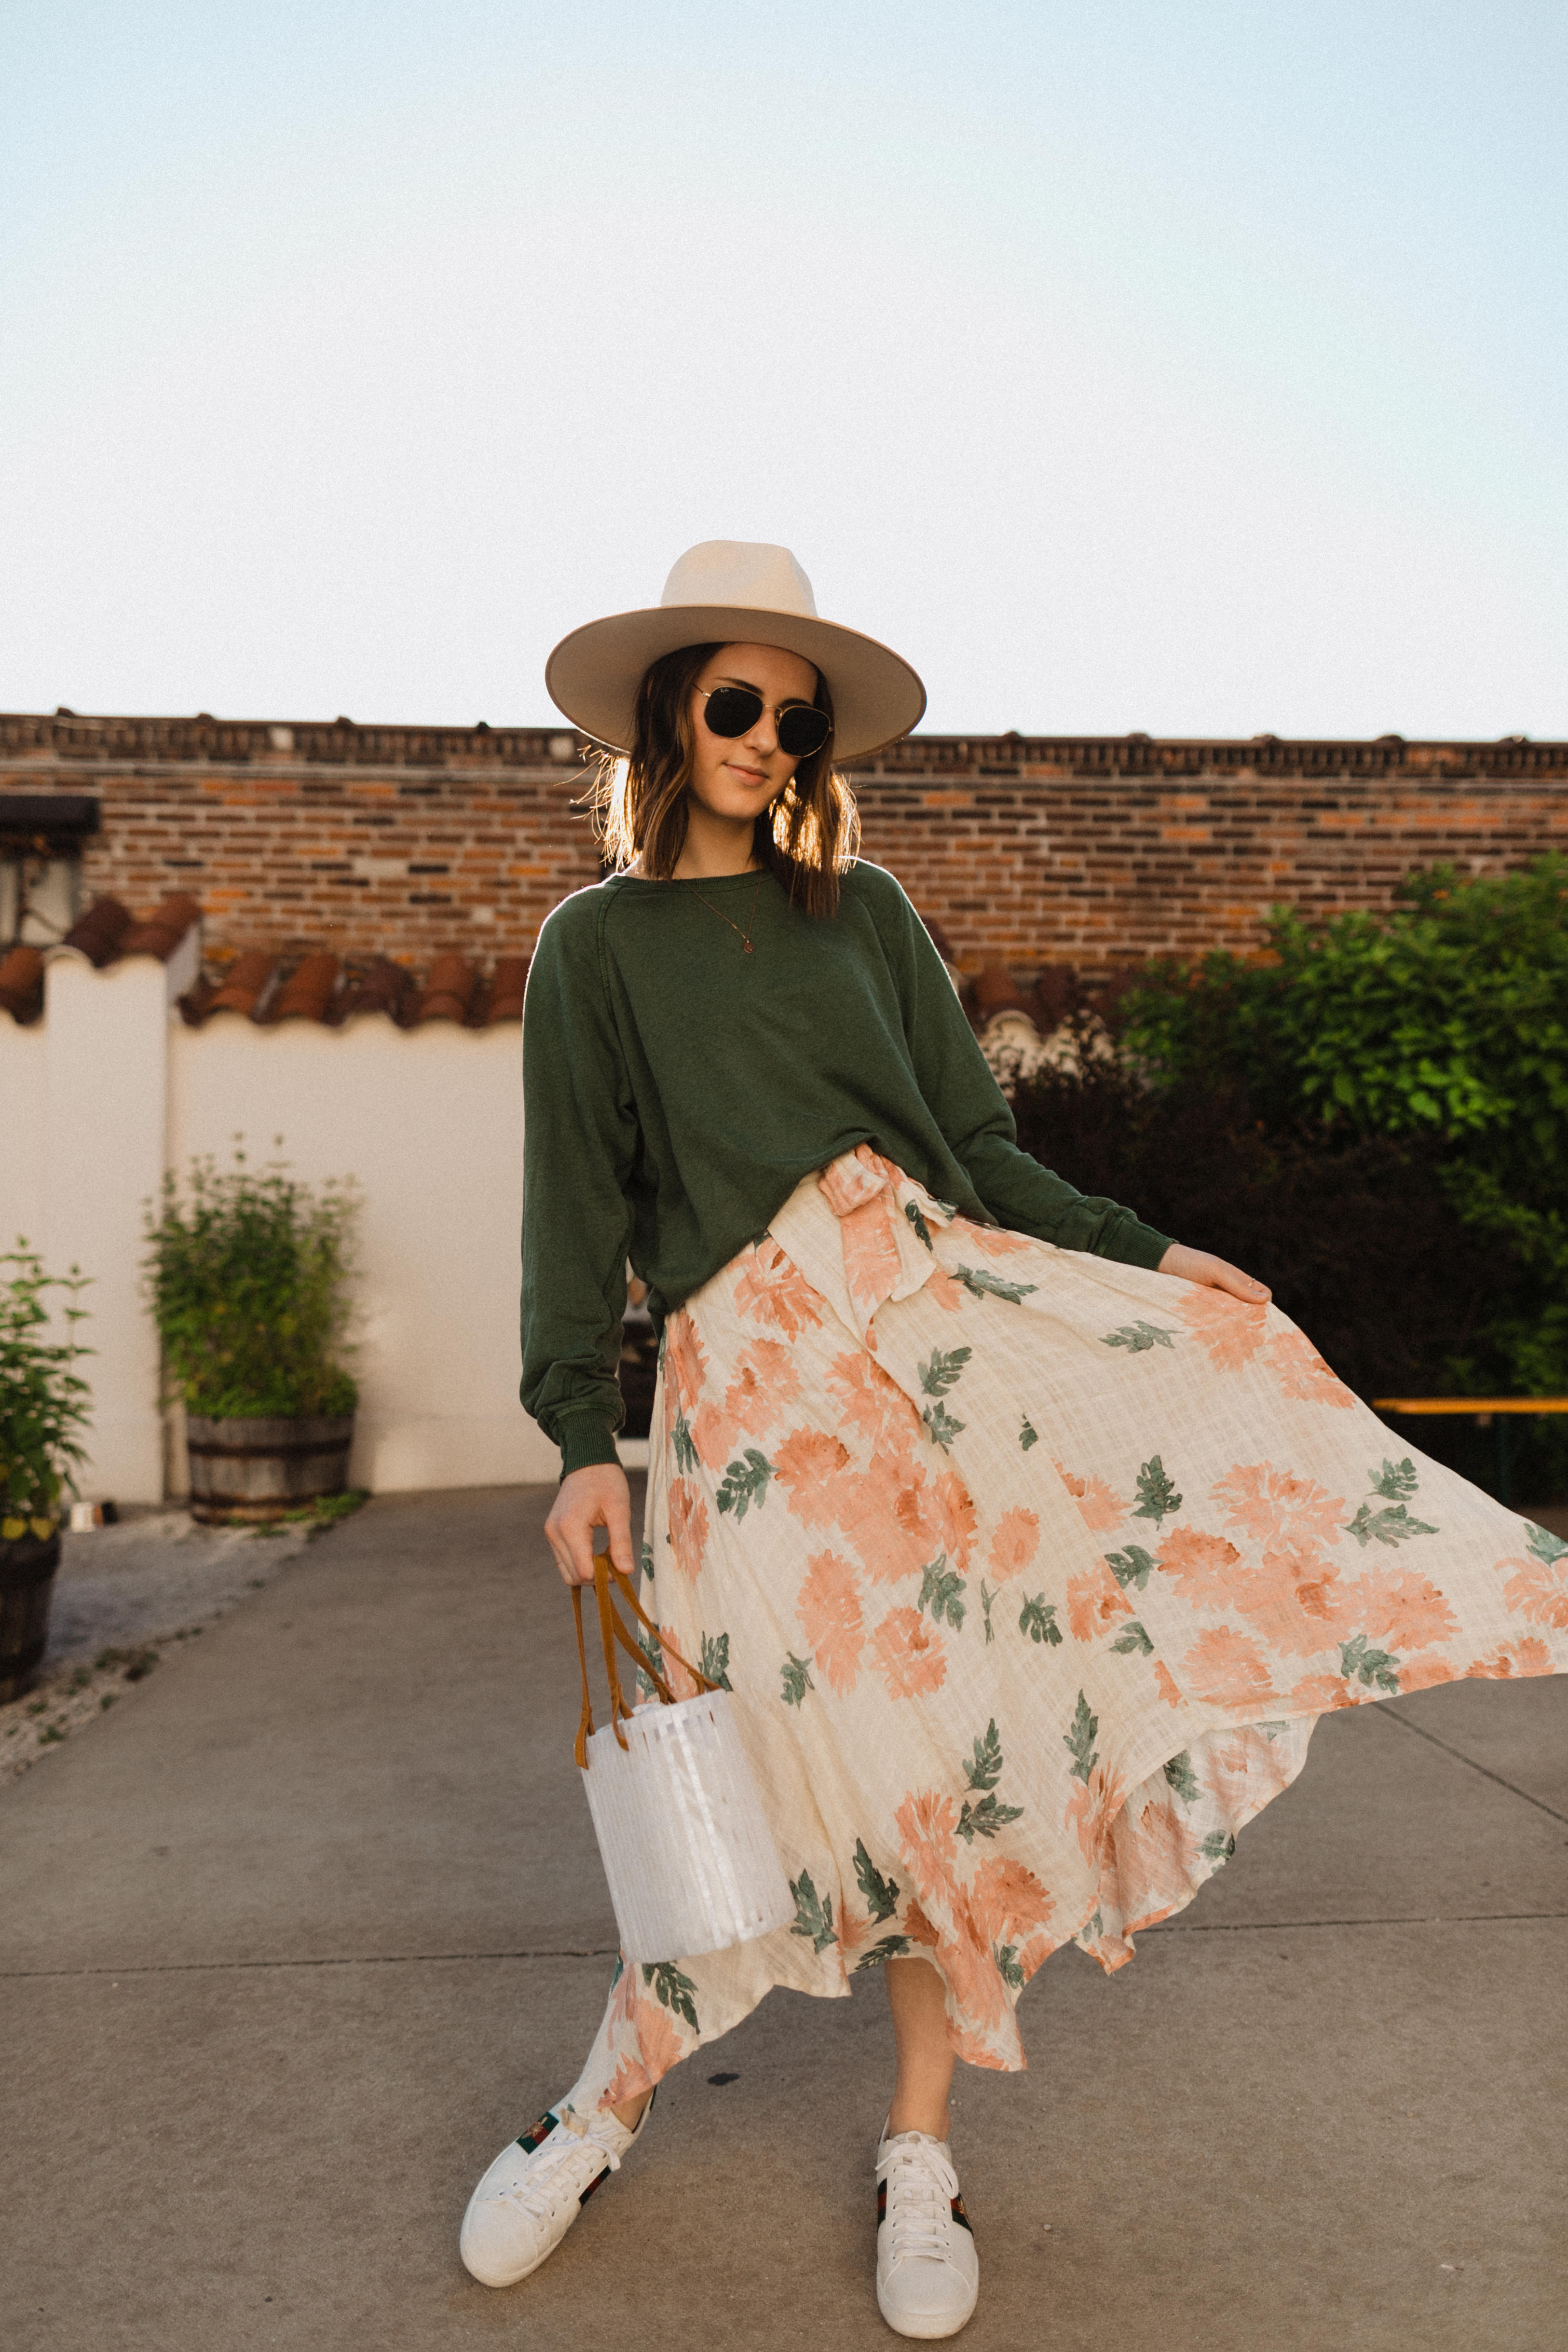 Lovestitch Clothing: 7 Outfits To Wear This Summer | midi skirt outfit | midi skirt outfit summer | midi skirt outfit casual | floral midi skirt outfit summer | floral midi skirt casual | maxi skirt outfit | sweatshirt outfit | sweatshirt outfit summer | Oh Darling Blog